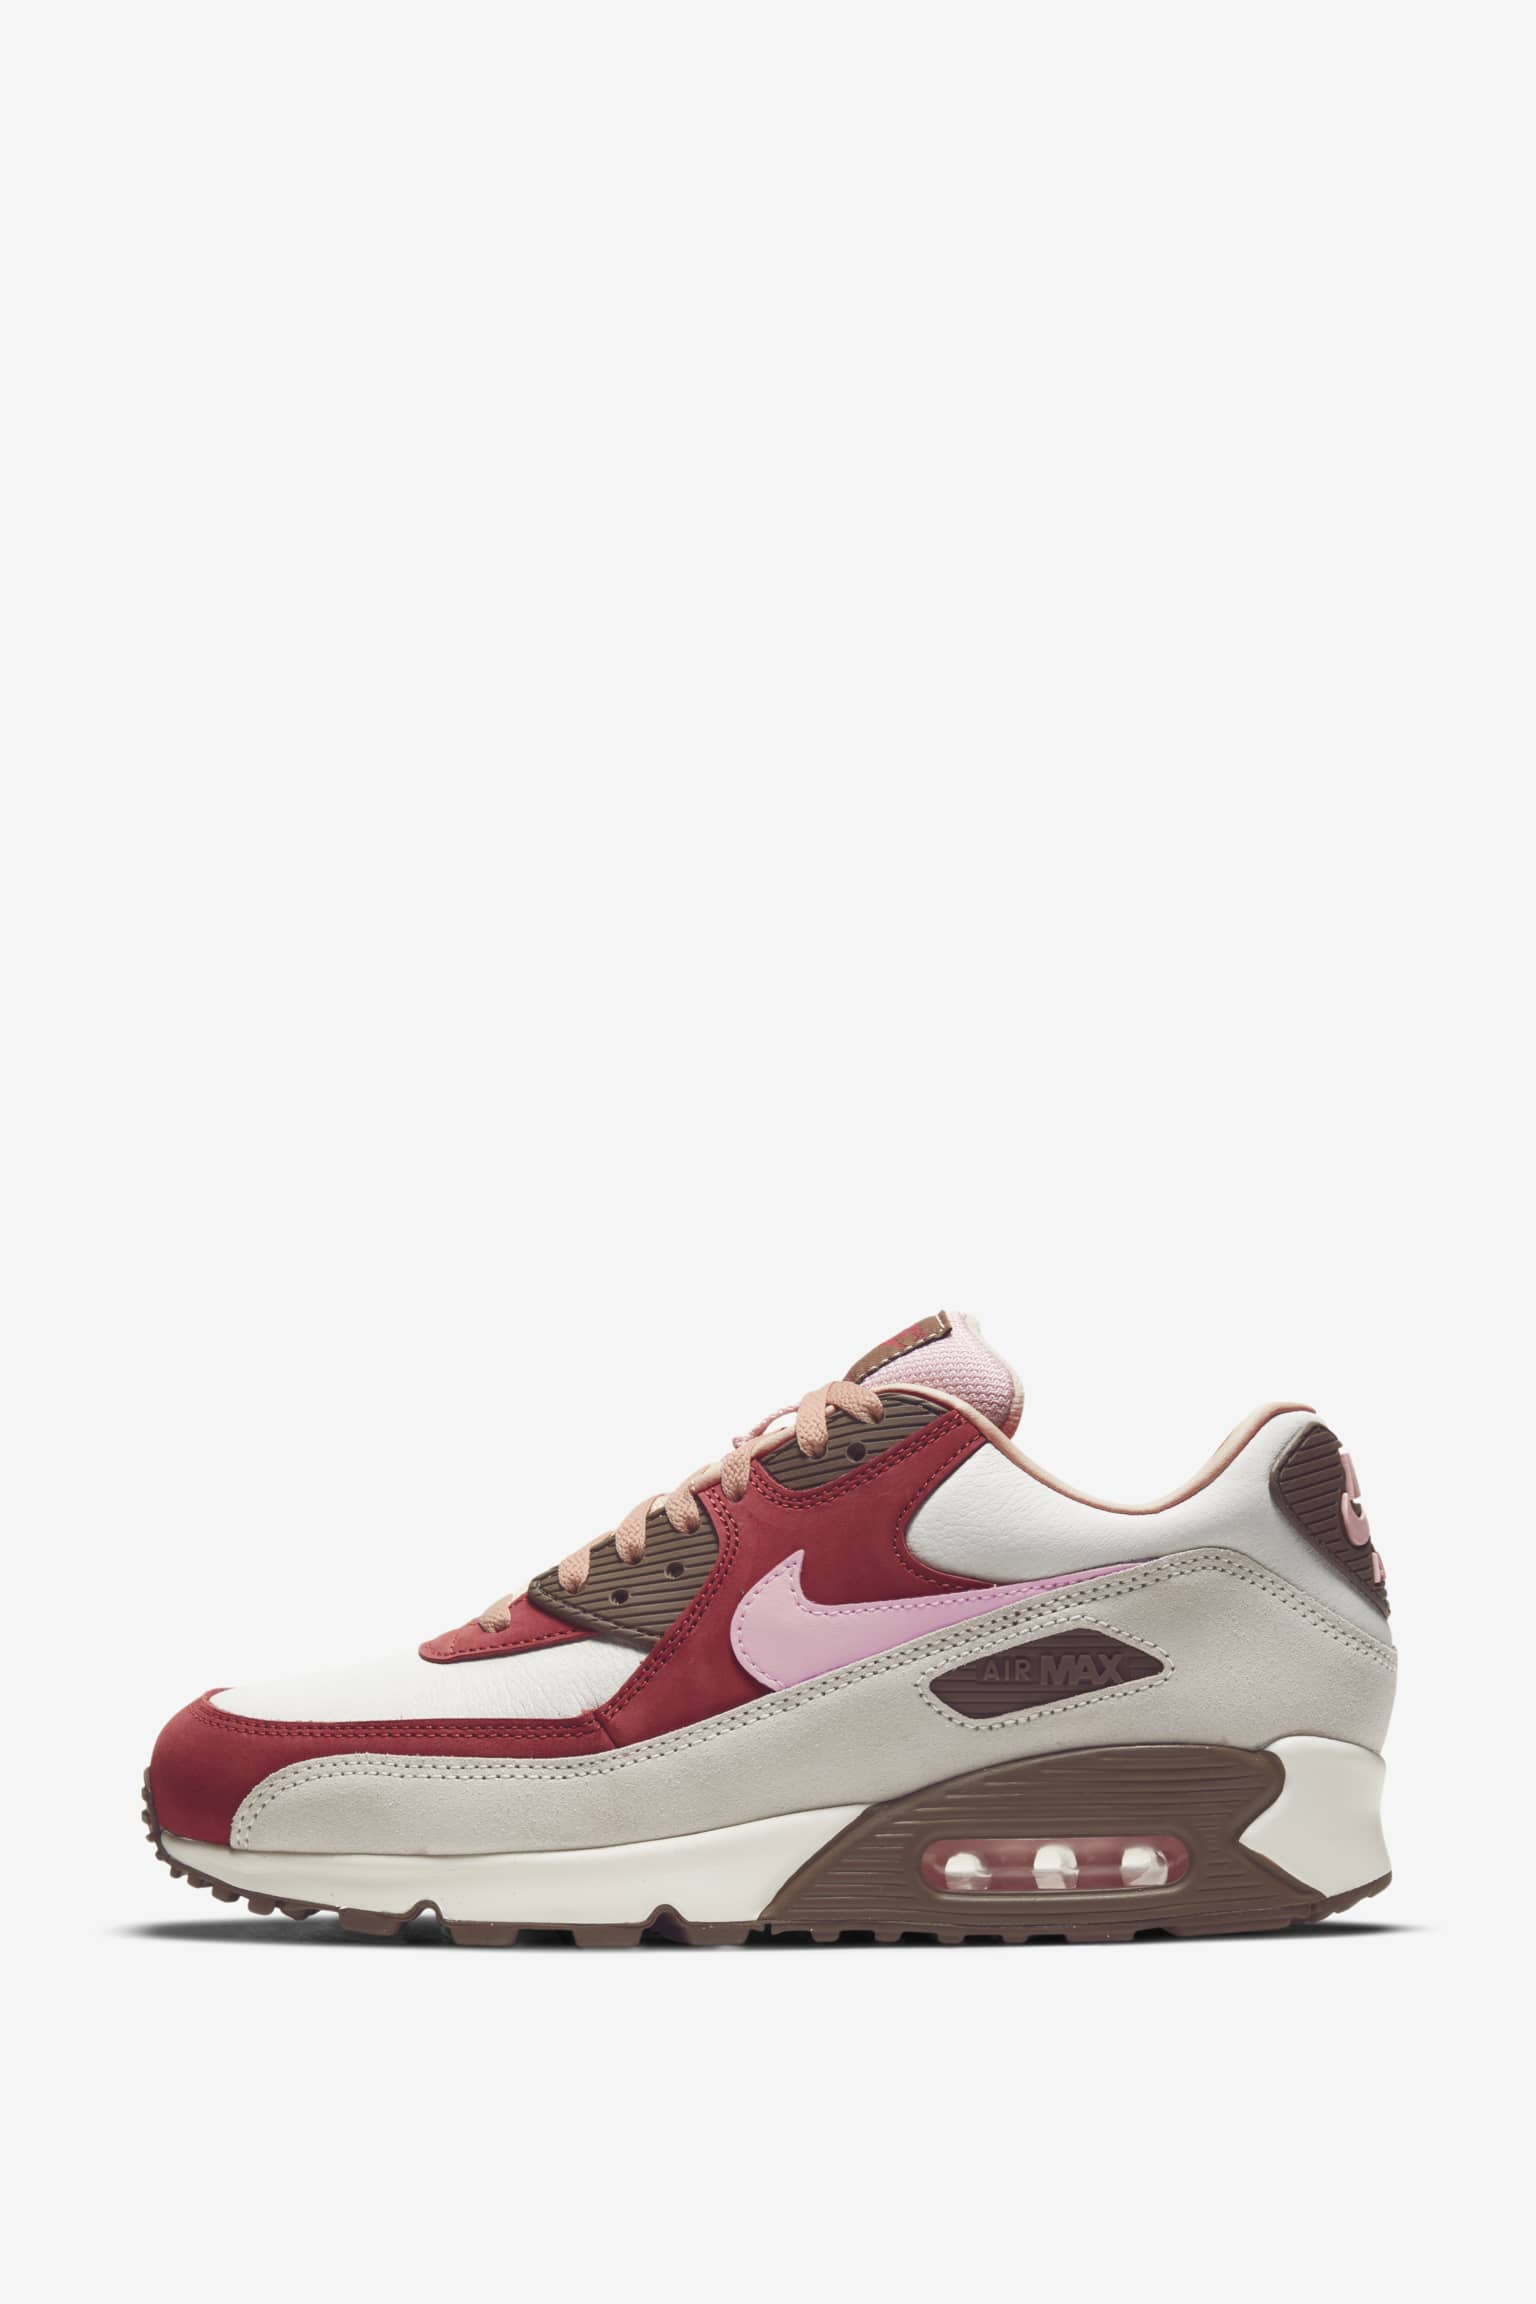 what is the latest air max